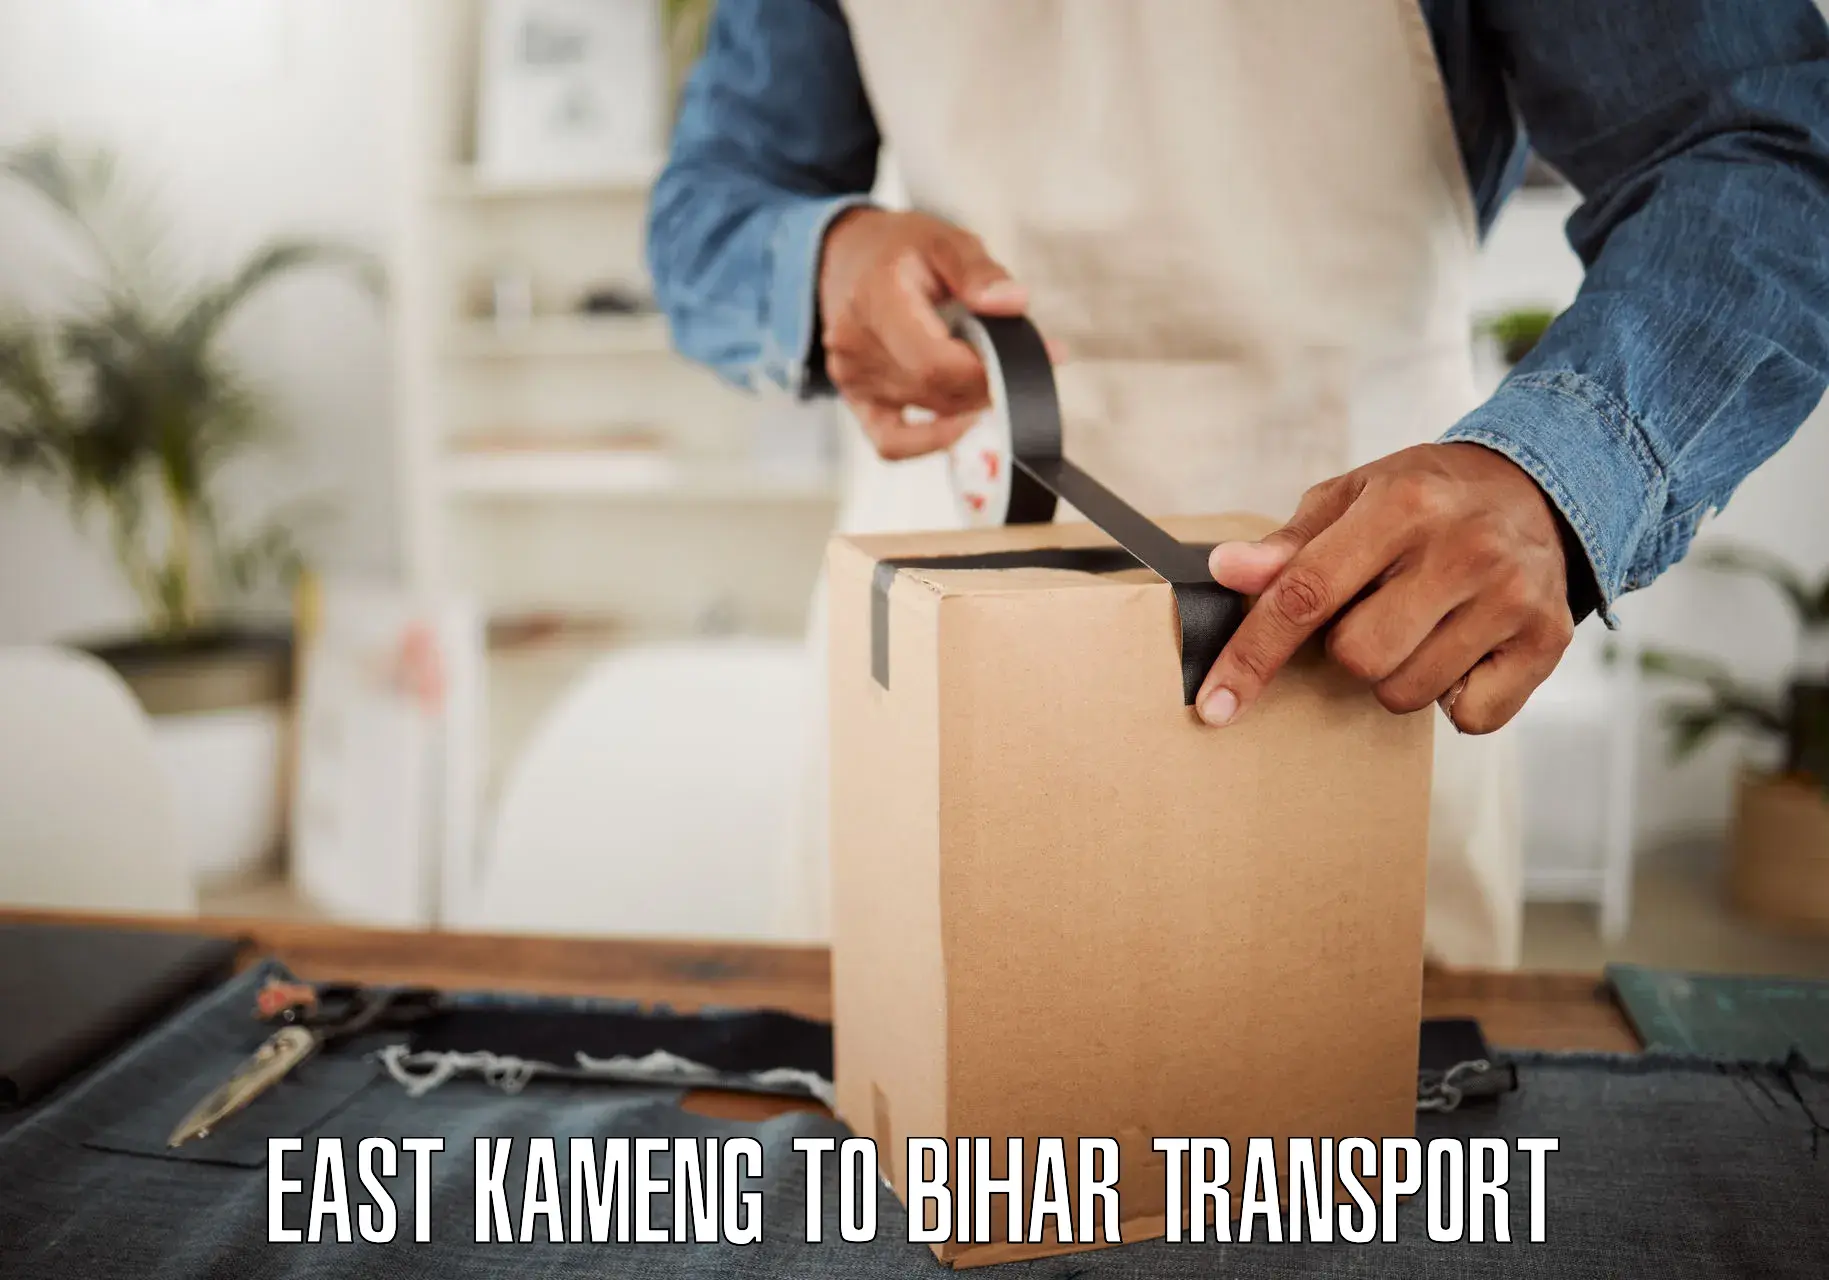 Road transport services in East Kameng to Dhaka